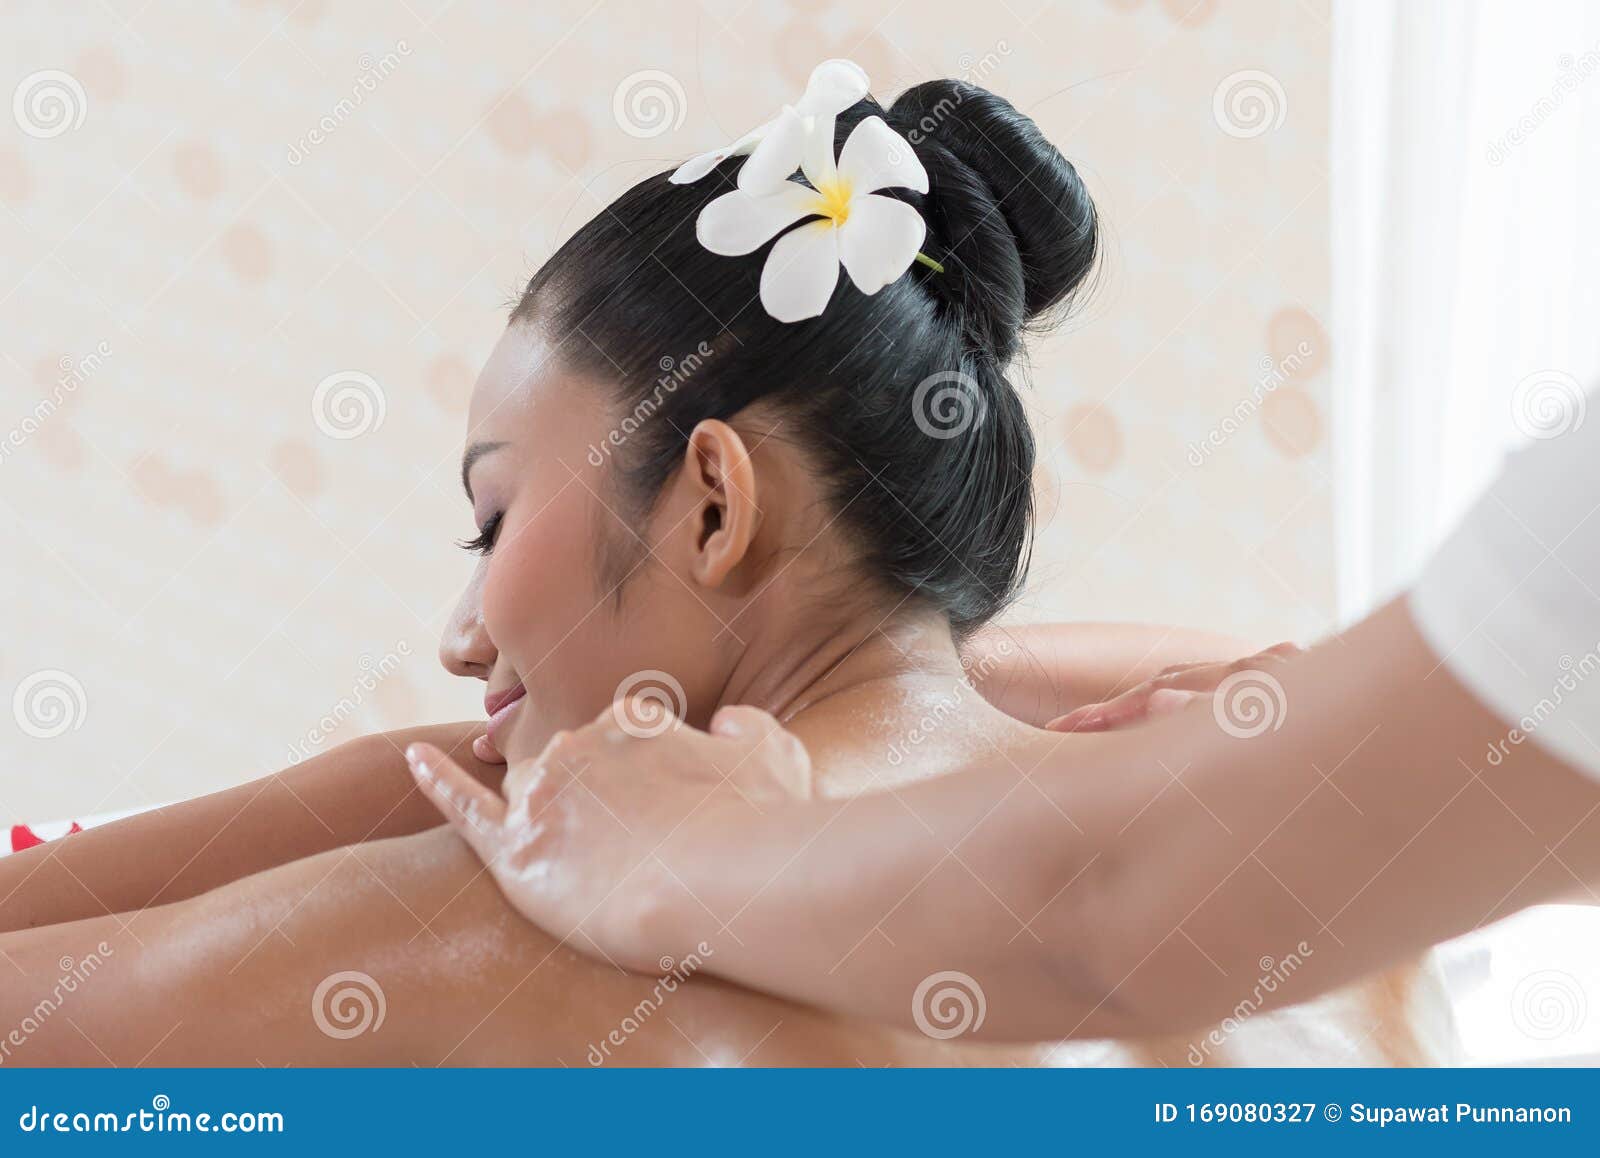 Woman Lying Down On A Massage Bed At A Spa Stock Image Image Of Hotel